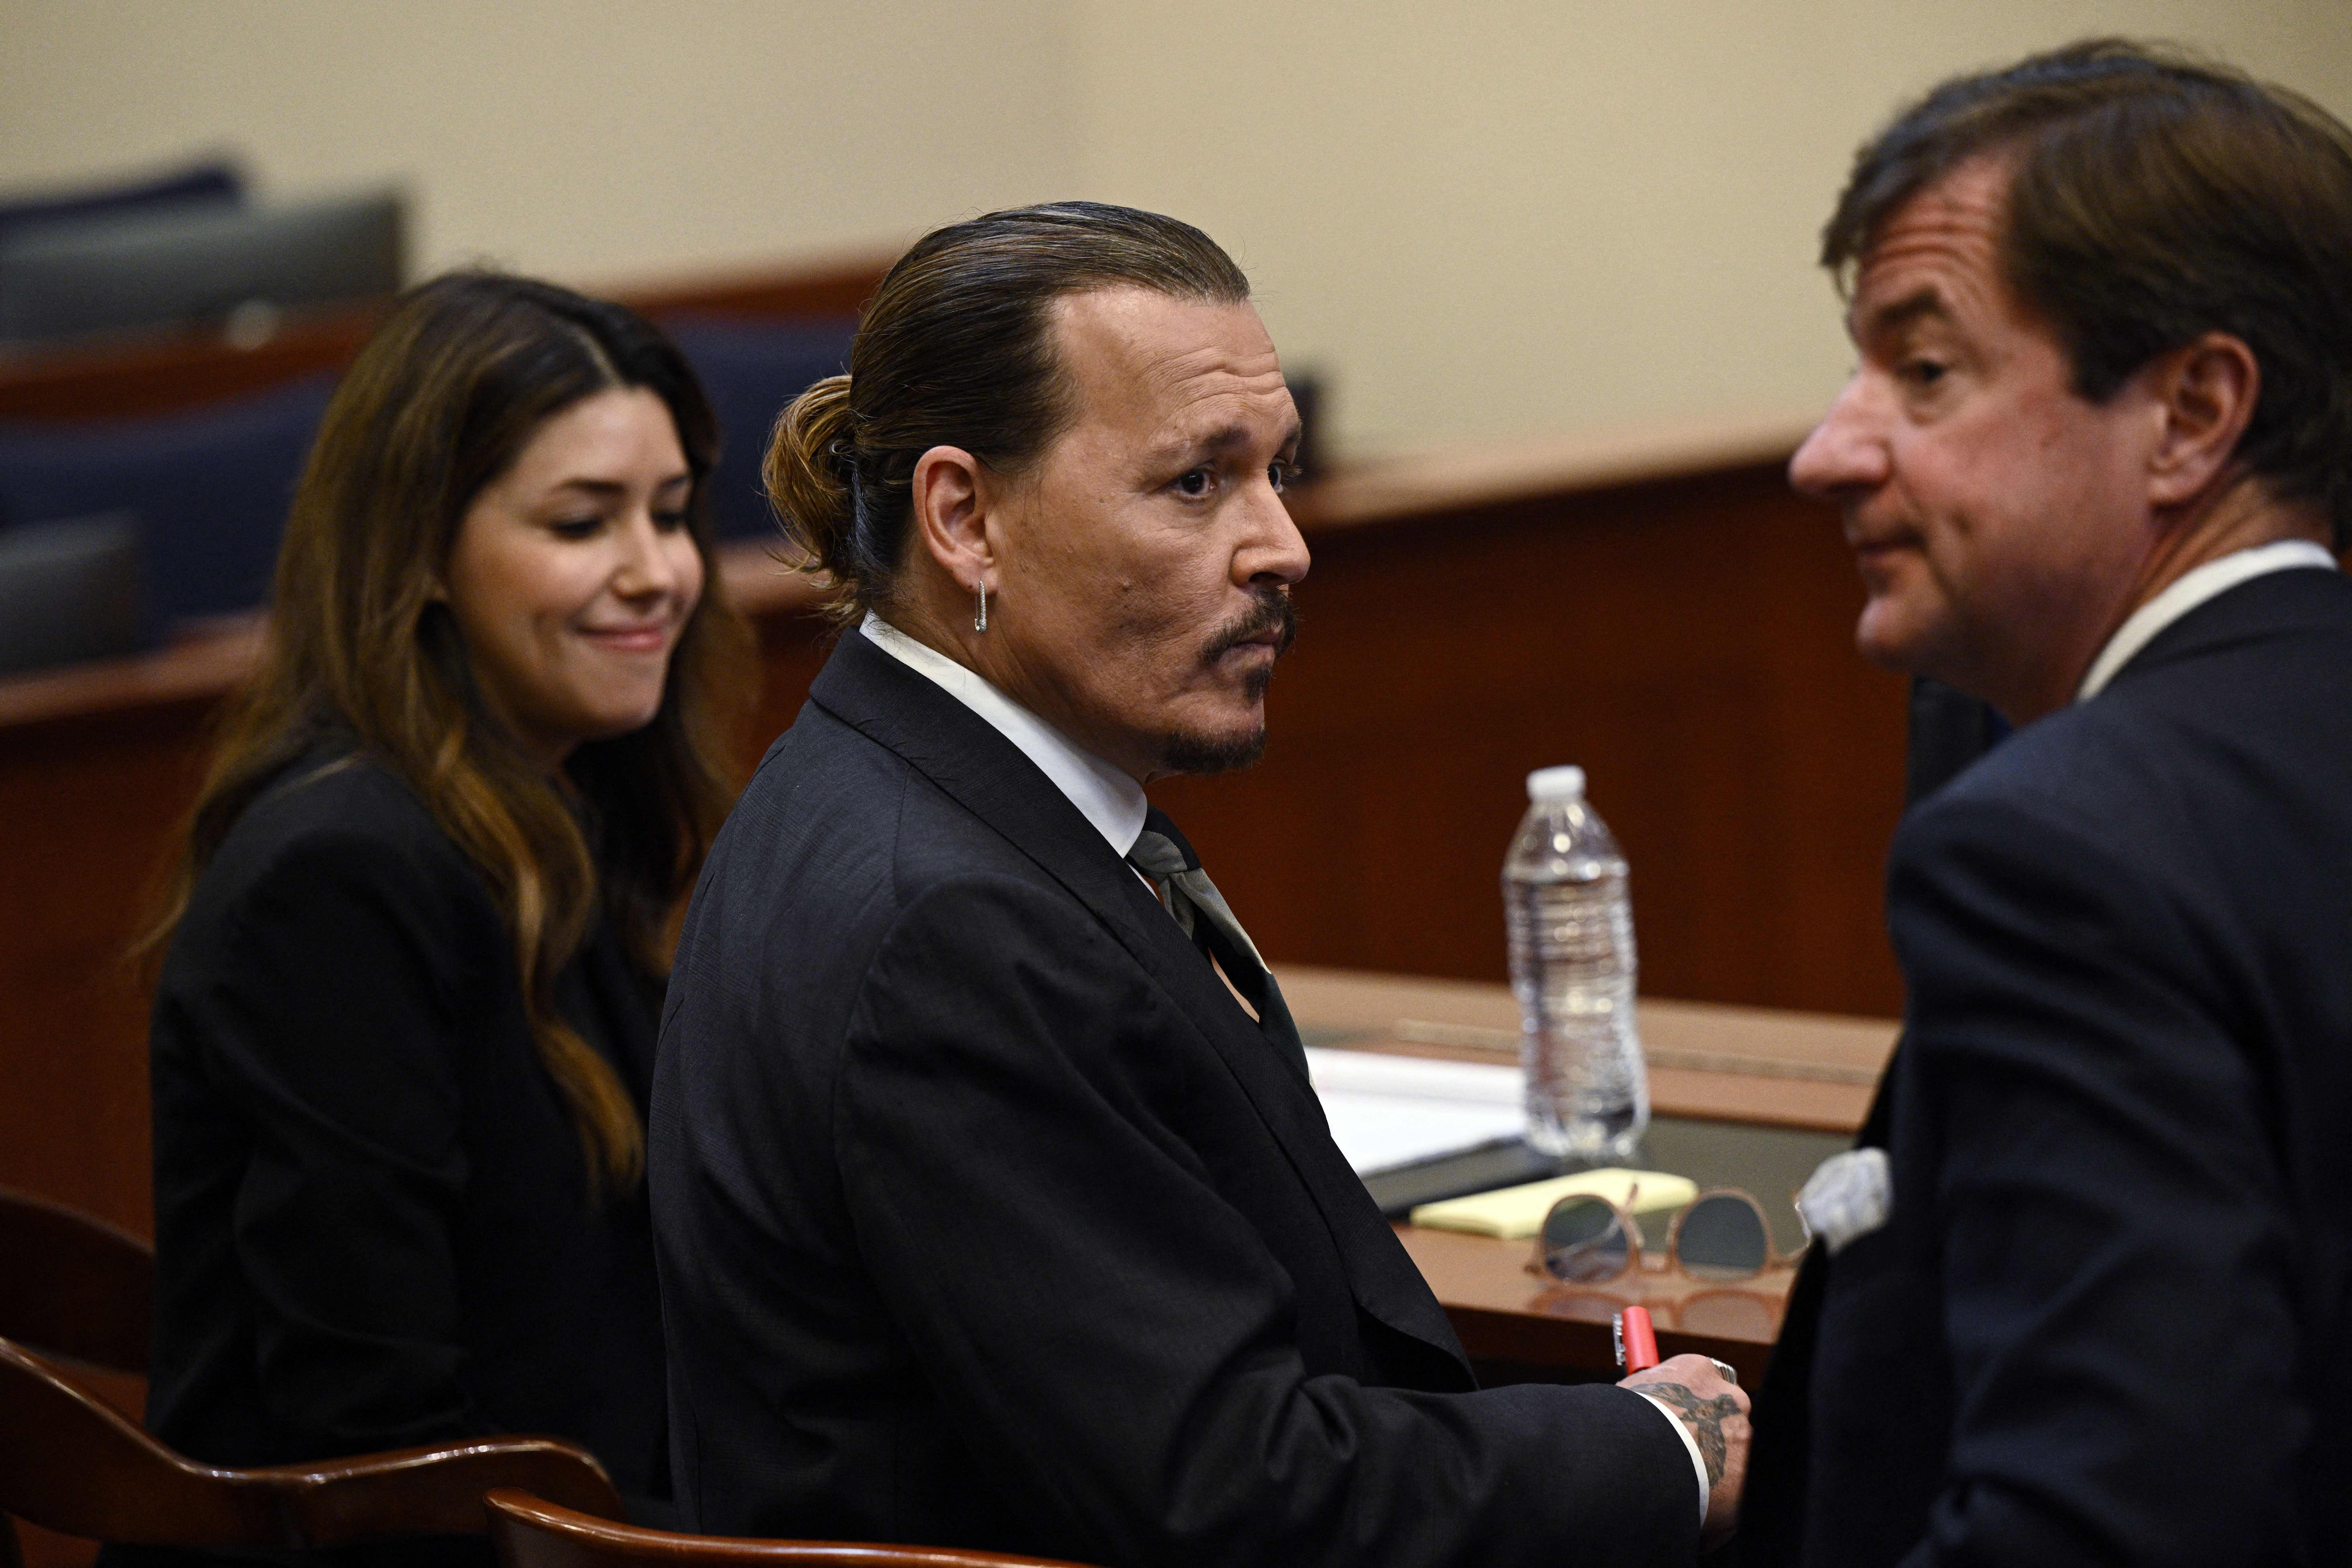 Johnny Depp sits in the courtroom at the Fairfax County Circuit Courthouse in Fairfax, Virginia, for his defamation trial on April 26, 2022. | Source: Getty Images